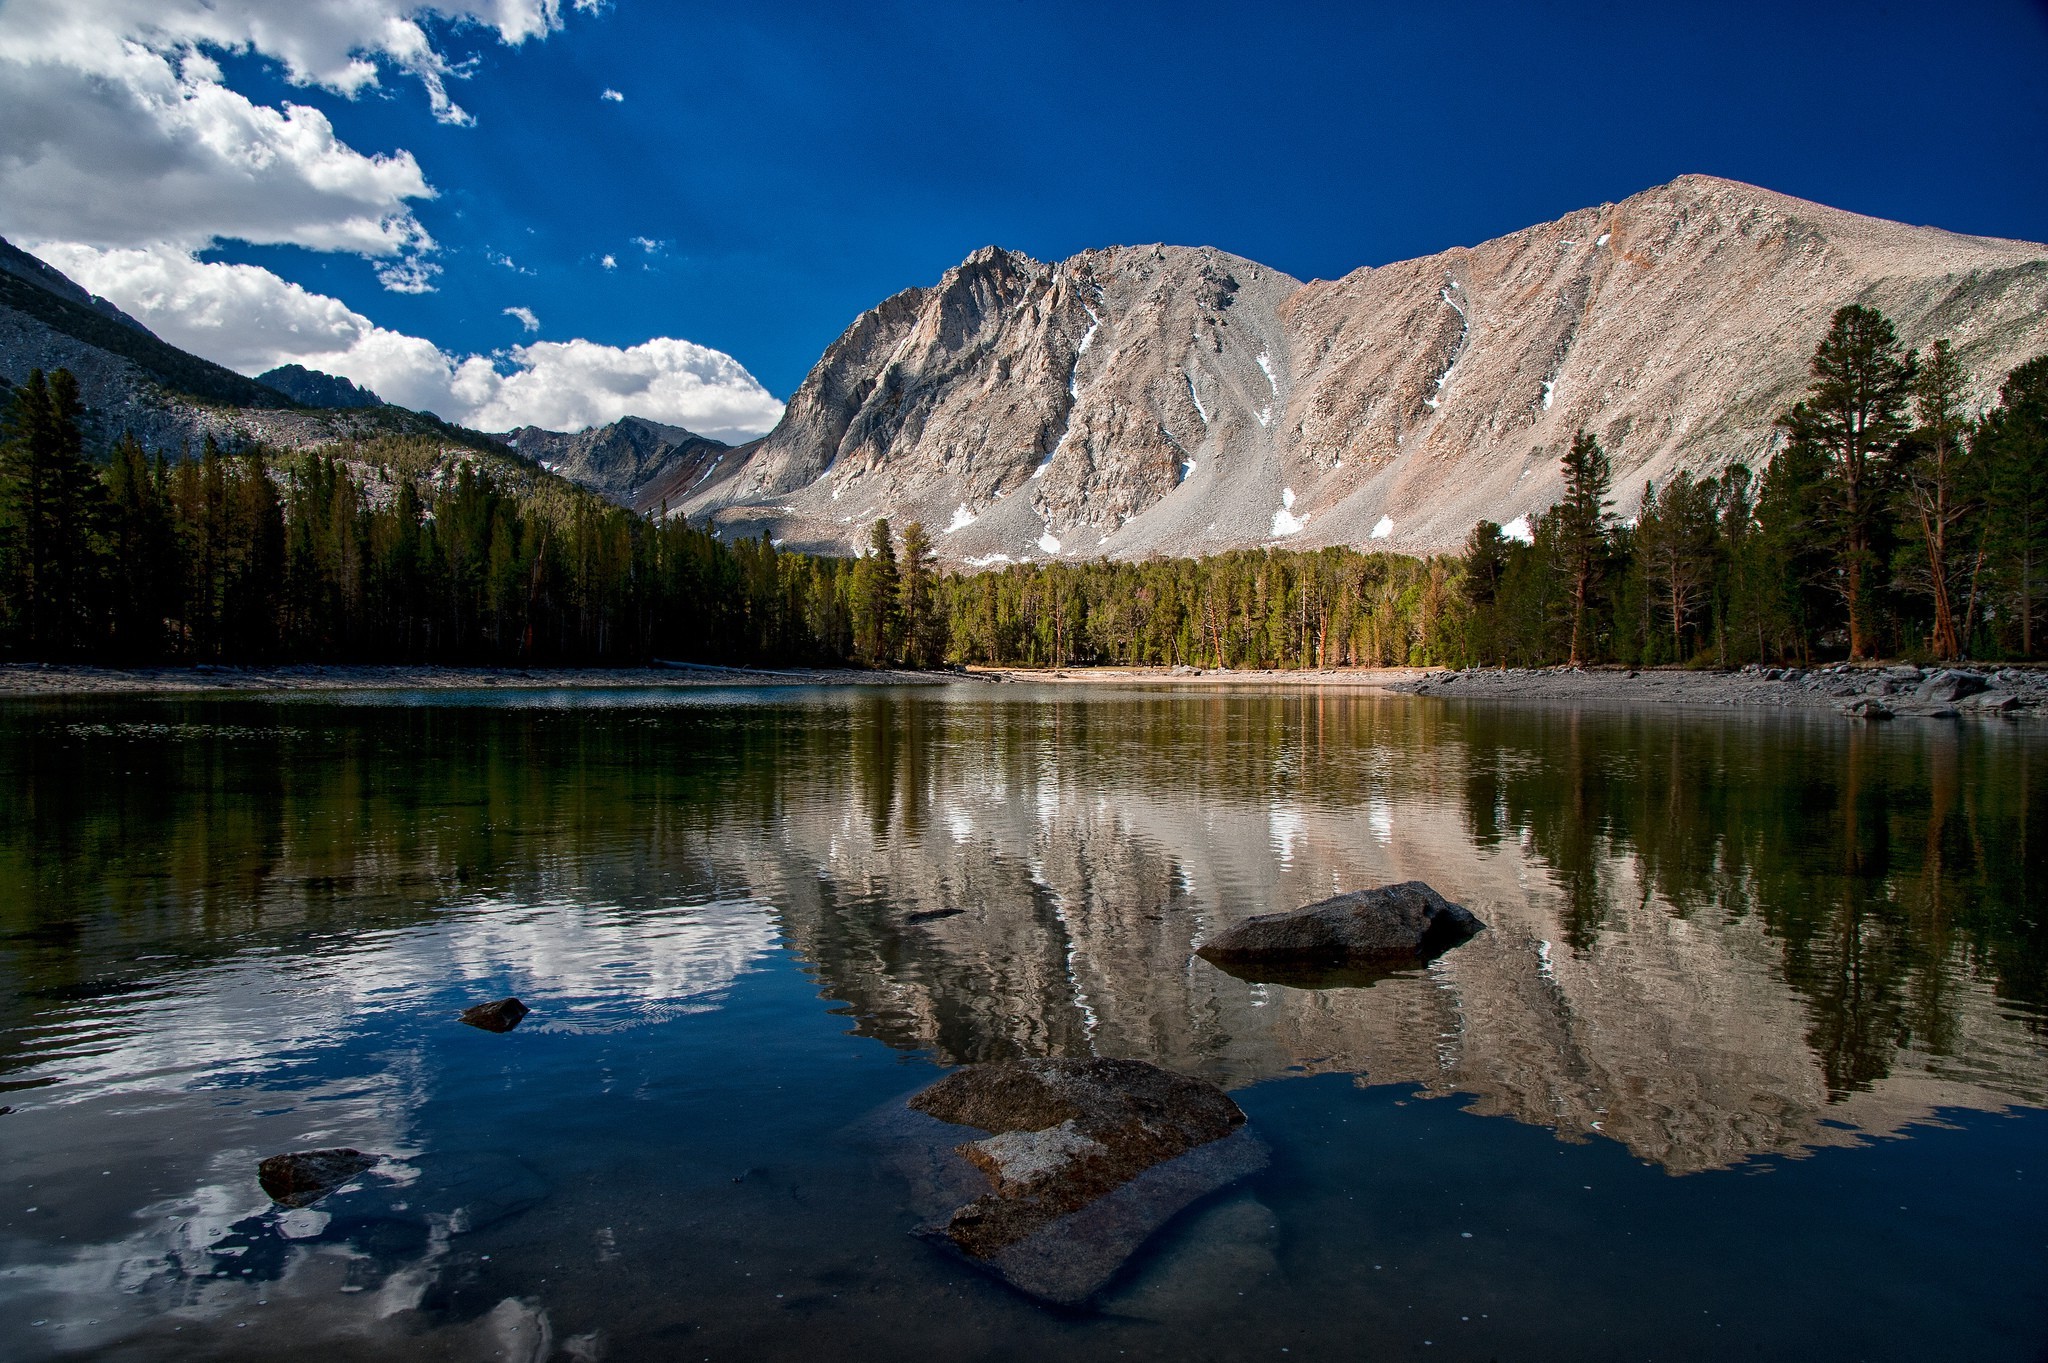 nature, Landscape, Mountain, Trees, Forest, Water, Lake, Clouds, Sierra Nevada, California, USA, Rock, Stones, Reflection Wallpaper